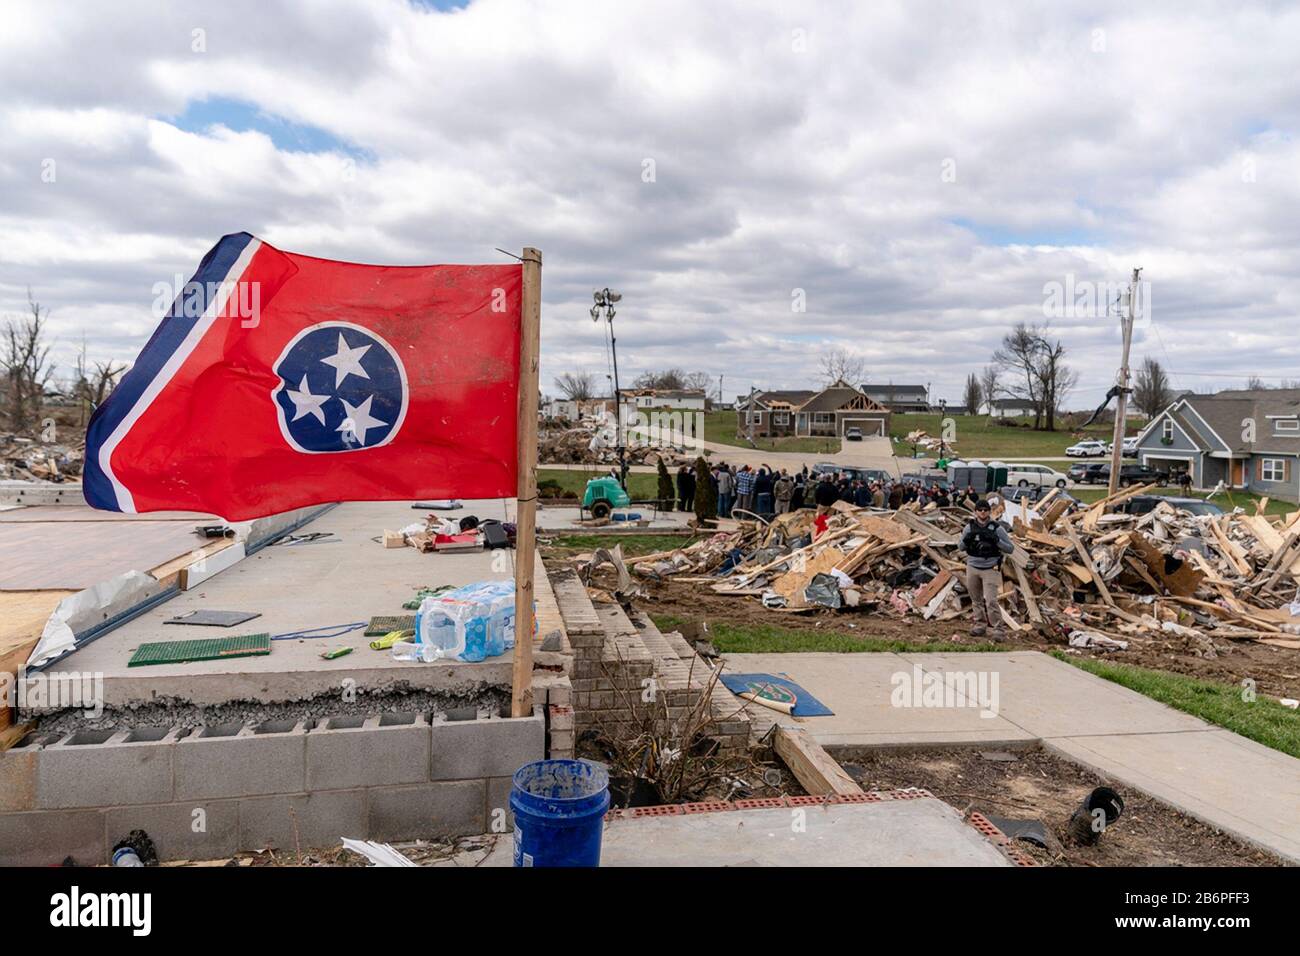 The Tennessee state flag flies over destroyed homes in the aftermath of a massive tornado March 6, 2020 in Cookeville, Tennessee. U.S President Donald Trump visited Nashville and the surrounding area to survey tornado damage that killed more than 24 people. Stock Photo